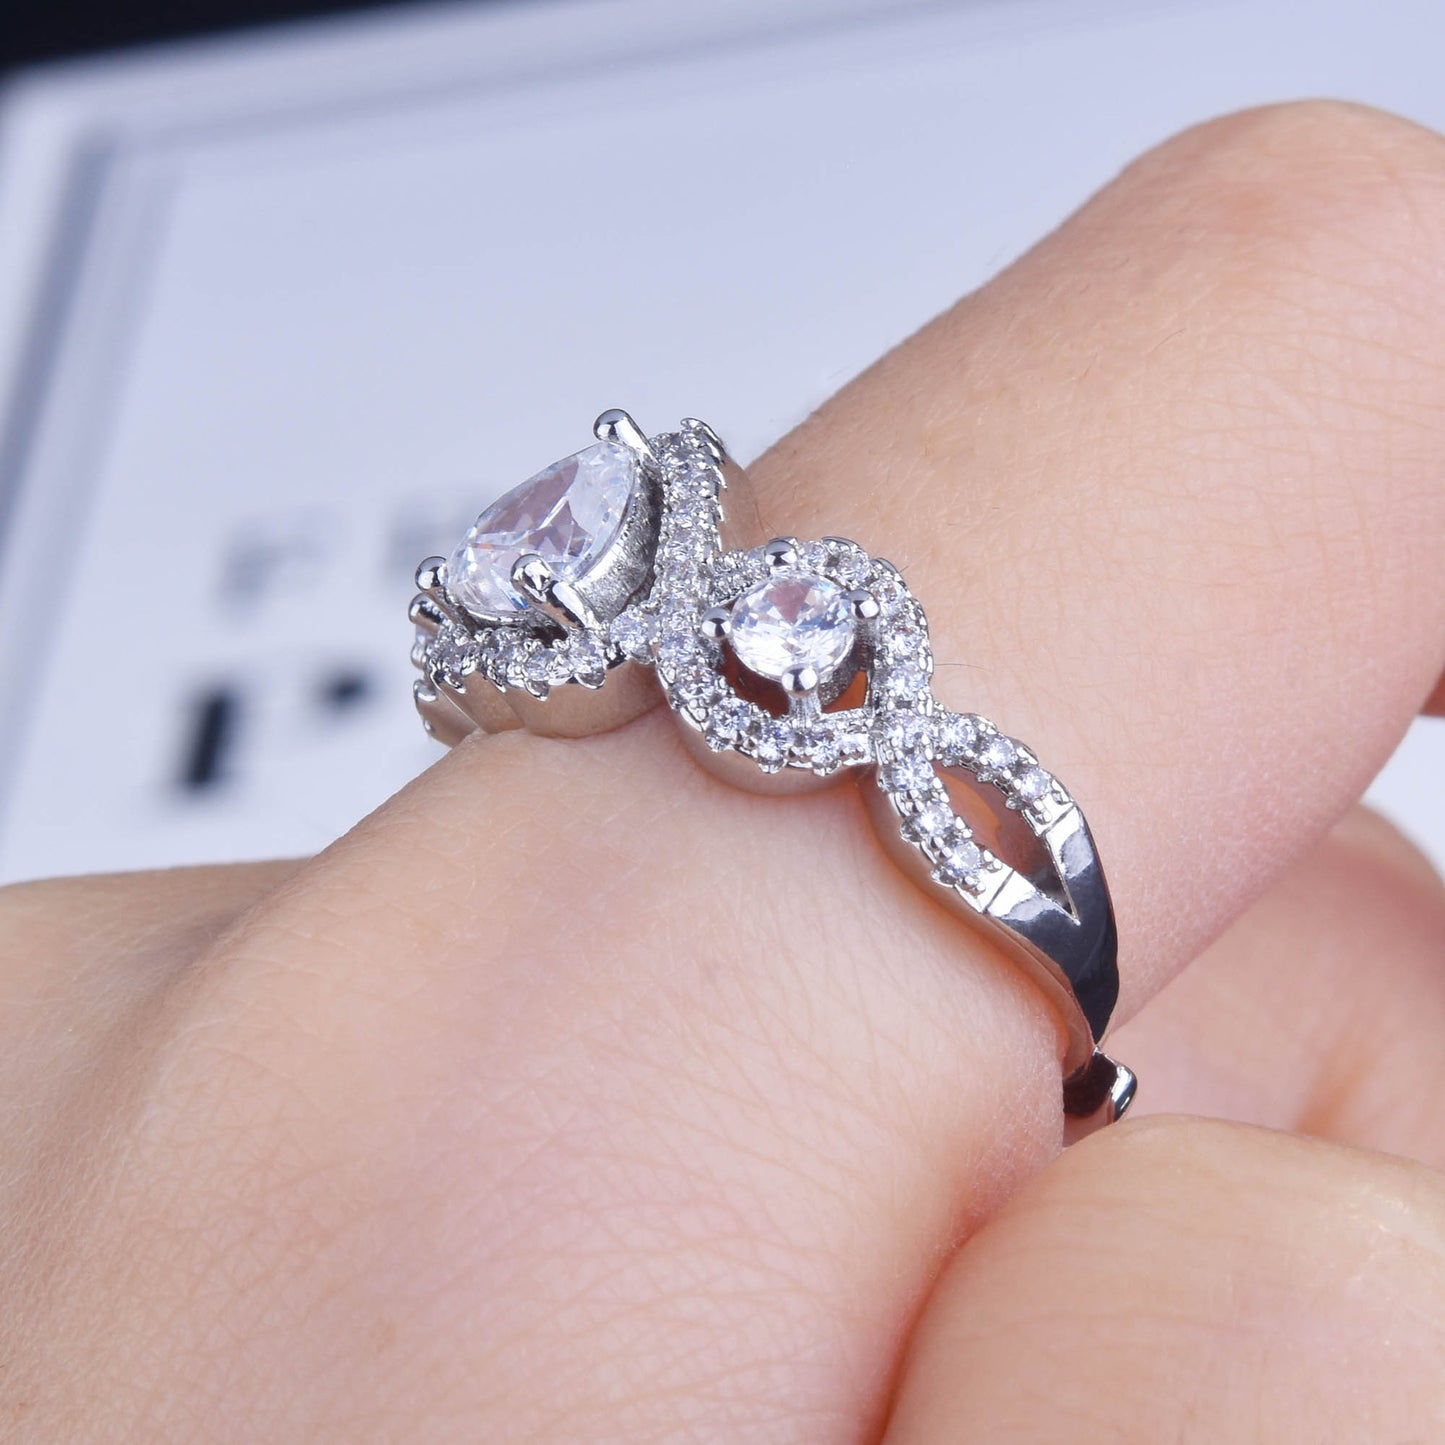 New Niche Design Heart-shaped Ring Inlaid With Diamonds Light Luxury Open Ring Female